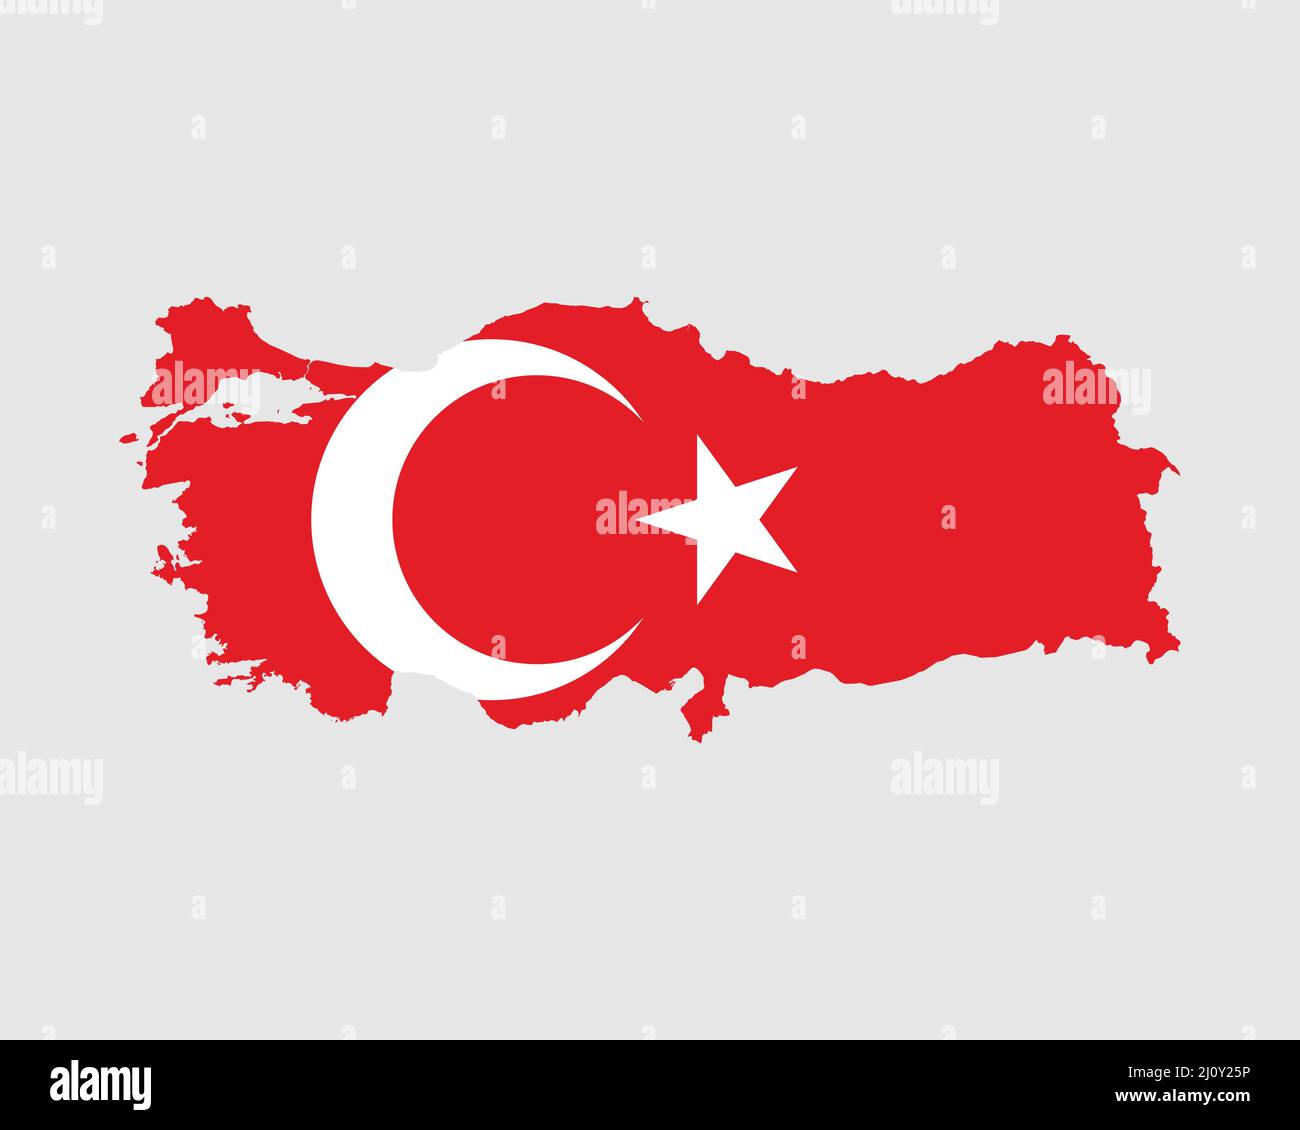 Turkey Flag Map. Map of the Republic of Turkey with the Turkish country banner. Vector Illustration. Stock Vector